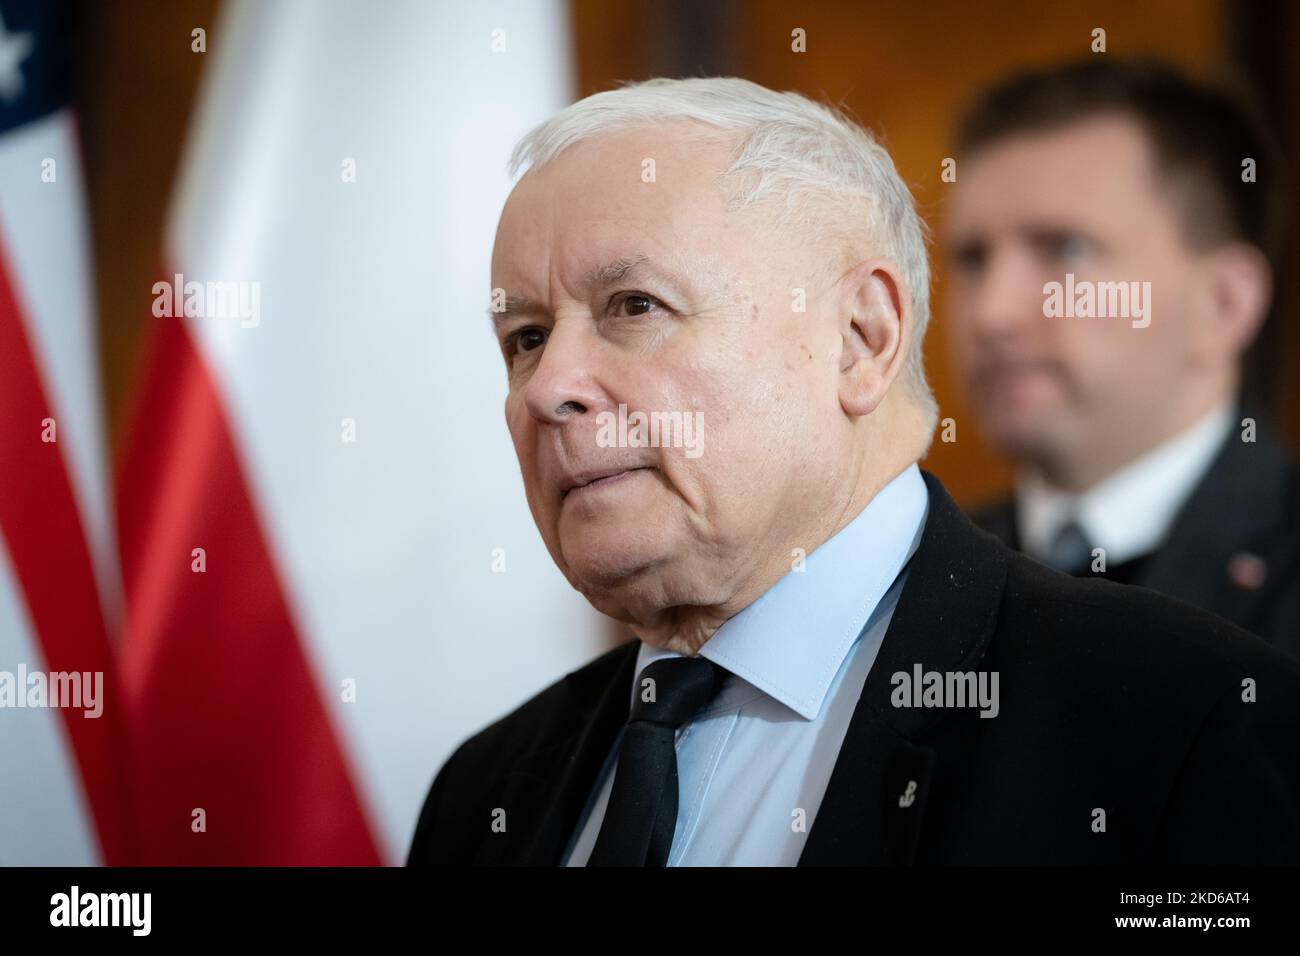 Leader of the Polish Law and Justice (PiS) ruling party Jaroslaw Kaczynski at the Chancellery in Warsaw, Poland on March 29, 2022 (Photo by Mateusz Wlodarczyk/NurPhoto) Stock Photo